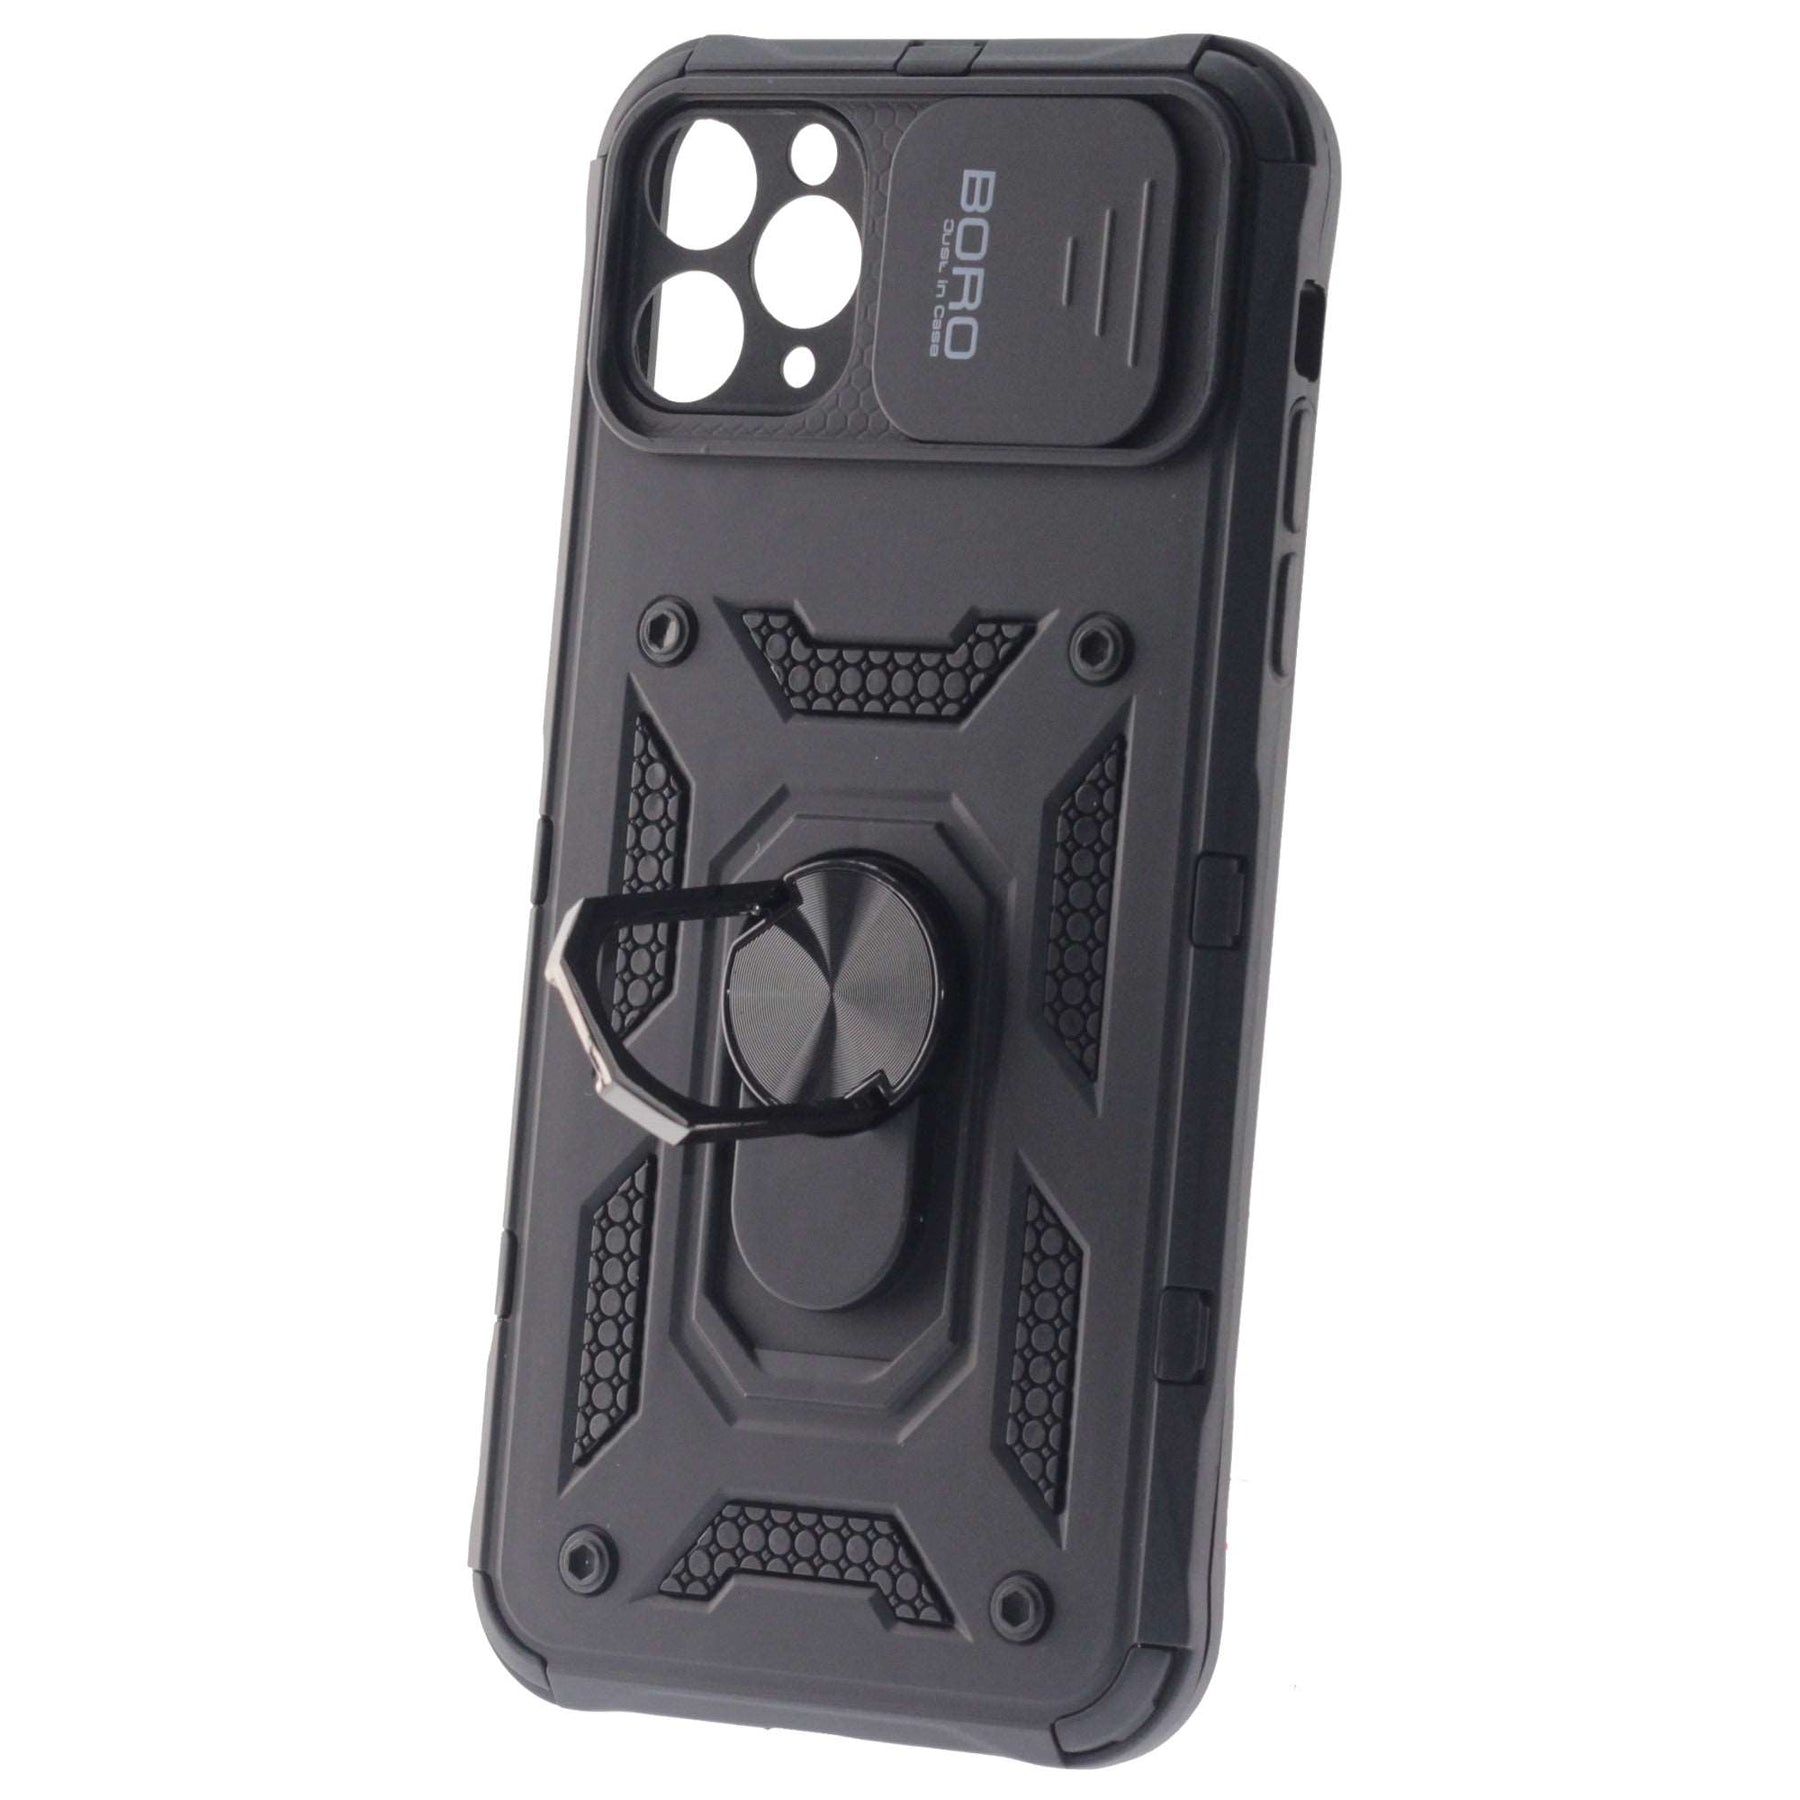 Apple iPhone 11 Pro MAX Case, Ring Armor Case with Lens Cover, Color Black